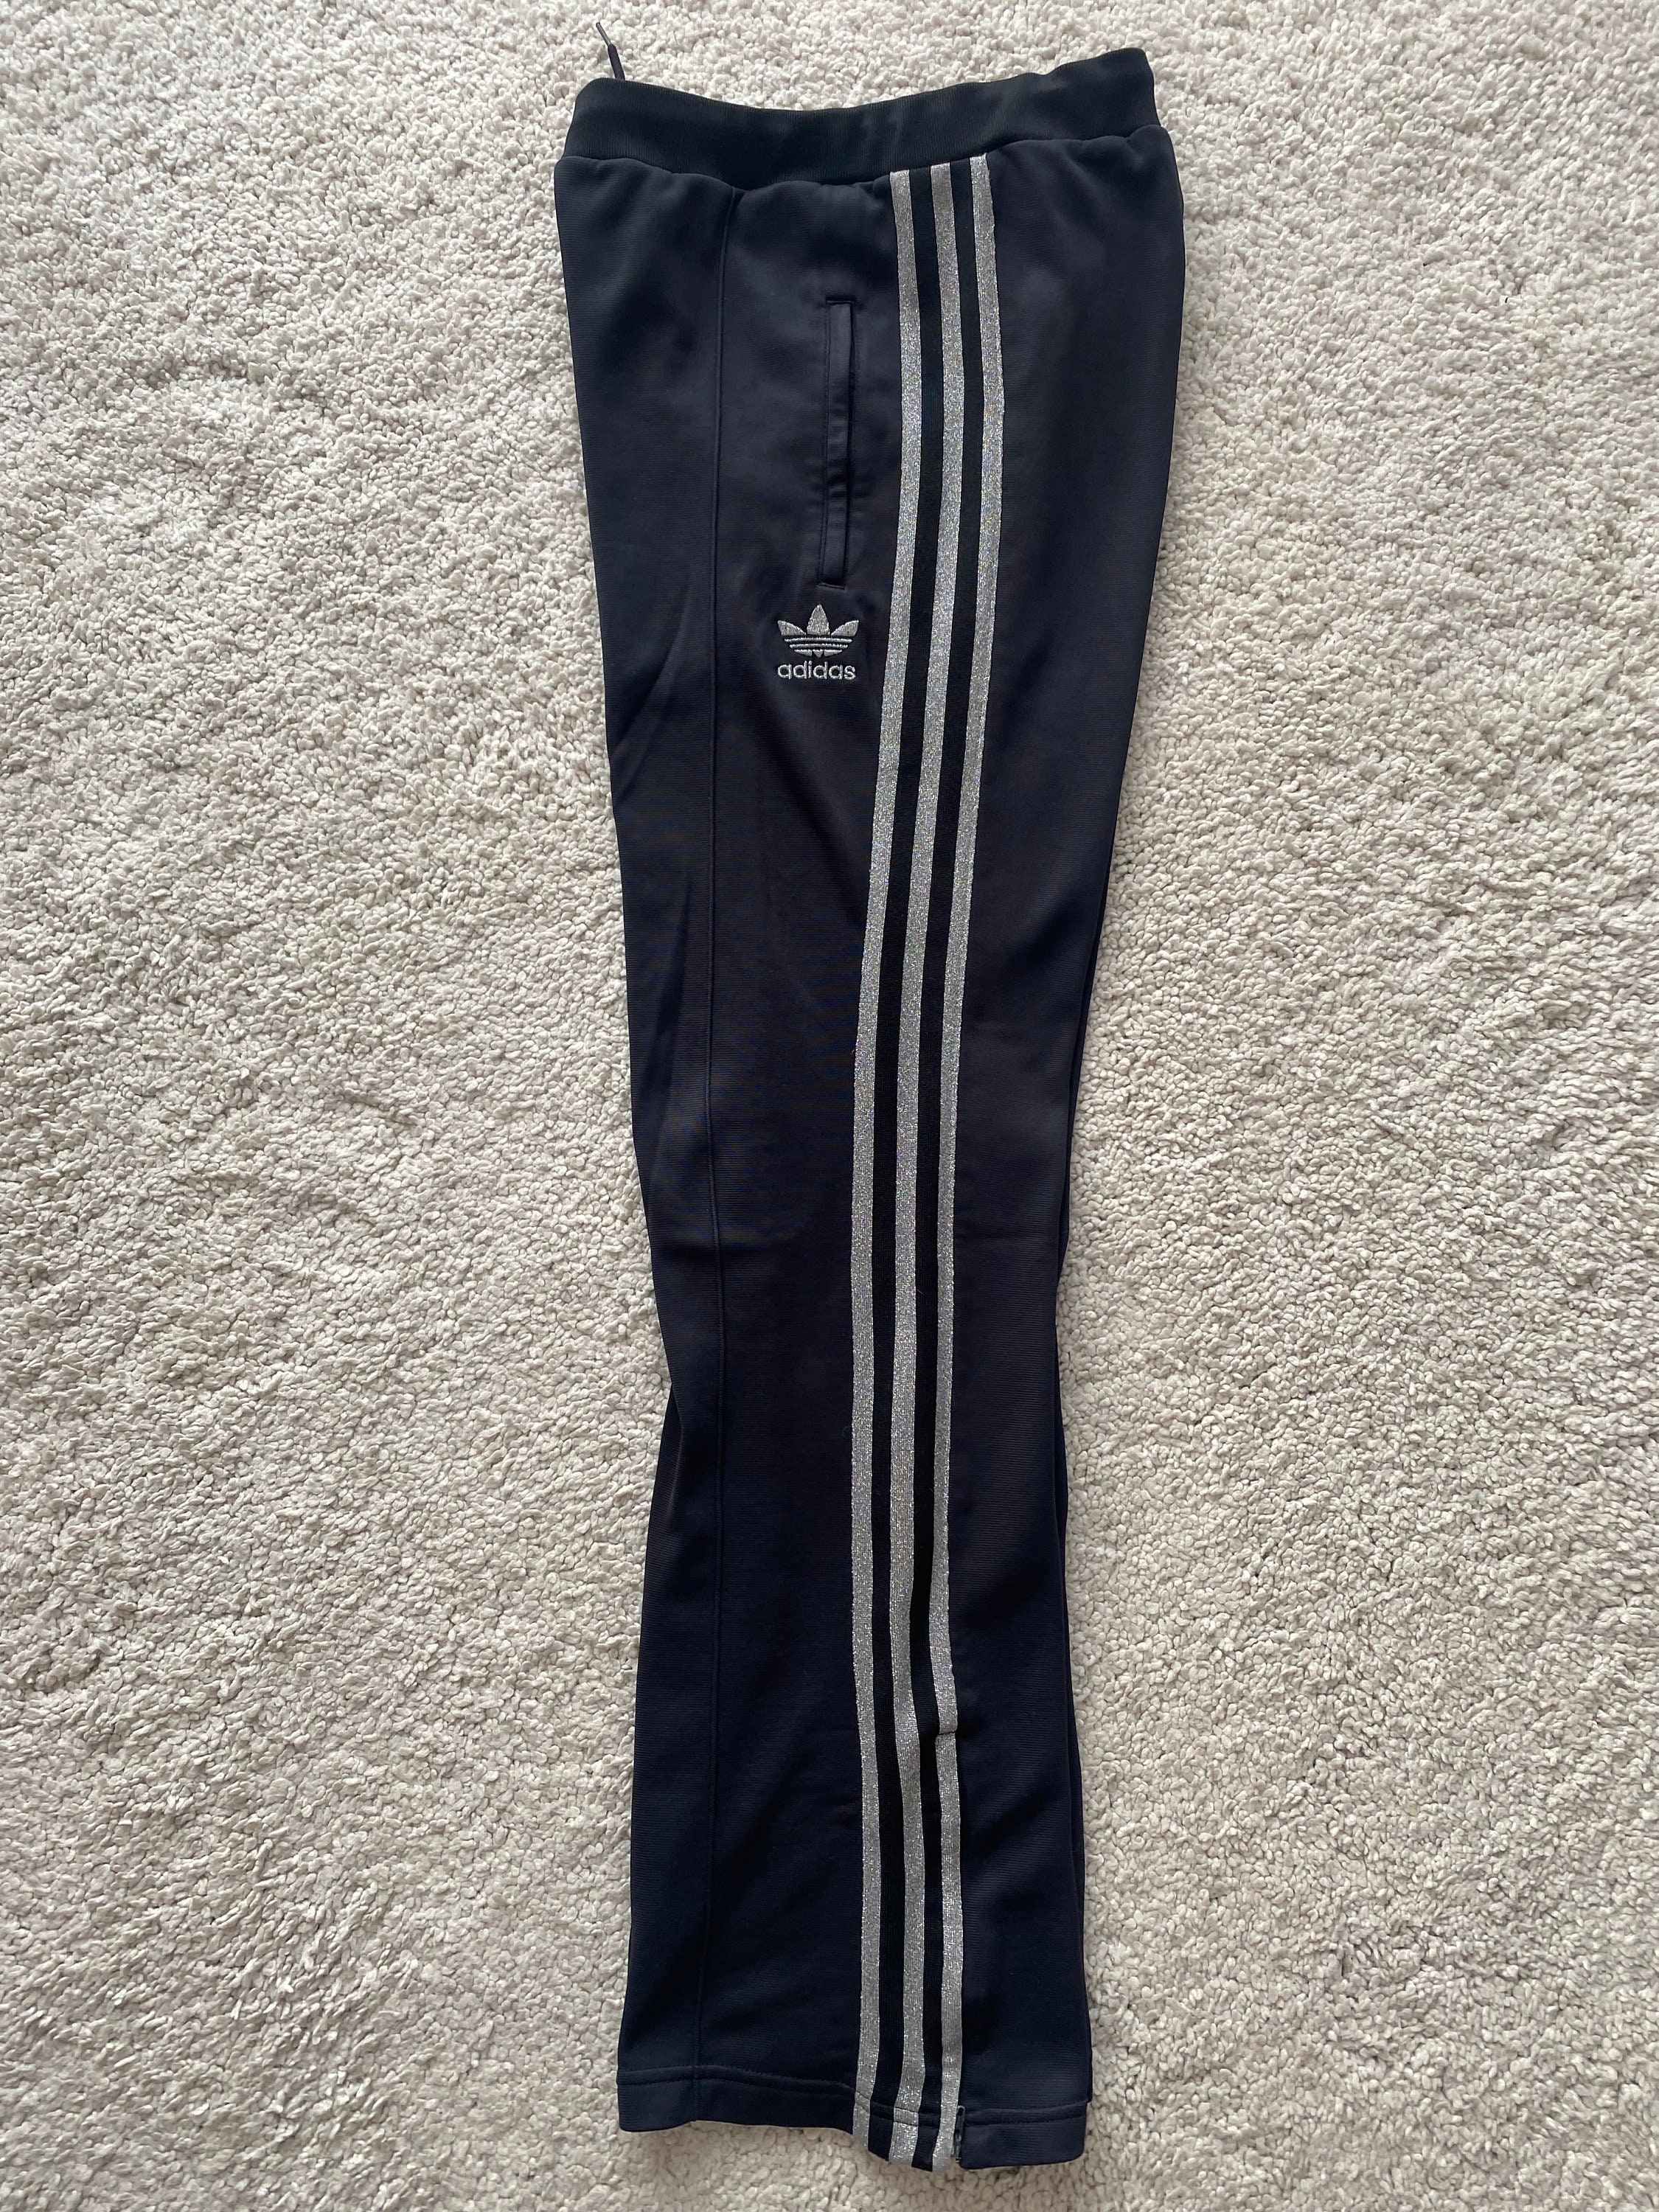 Originals Womens Track Pants Trousers Training - Etsy